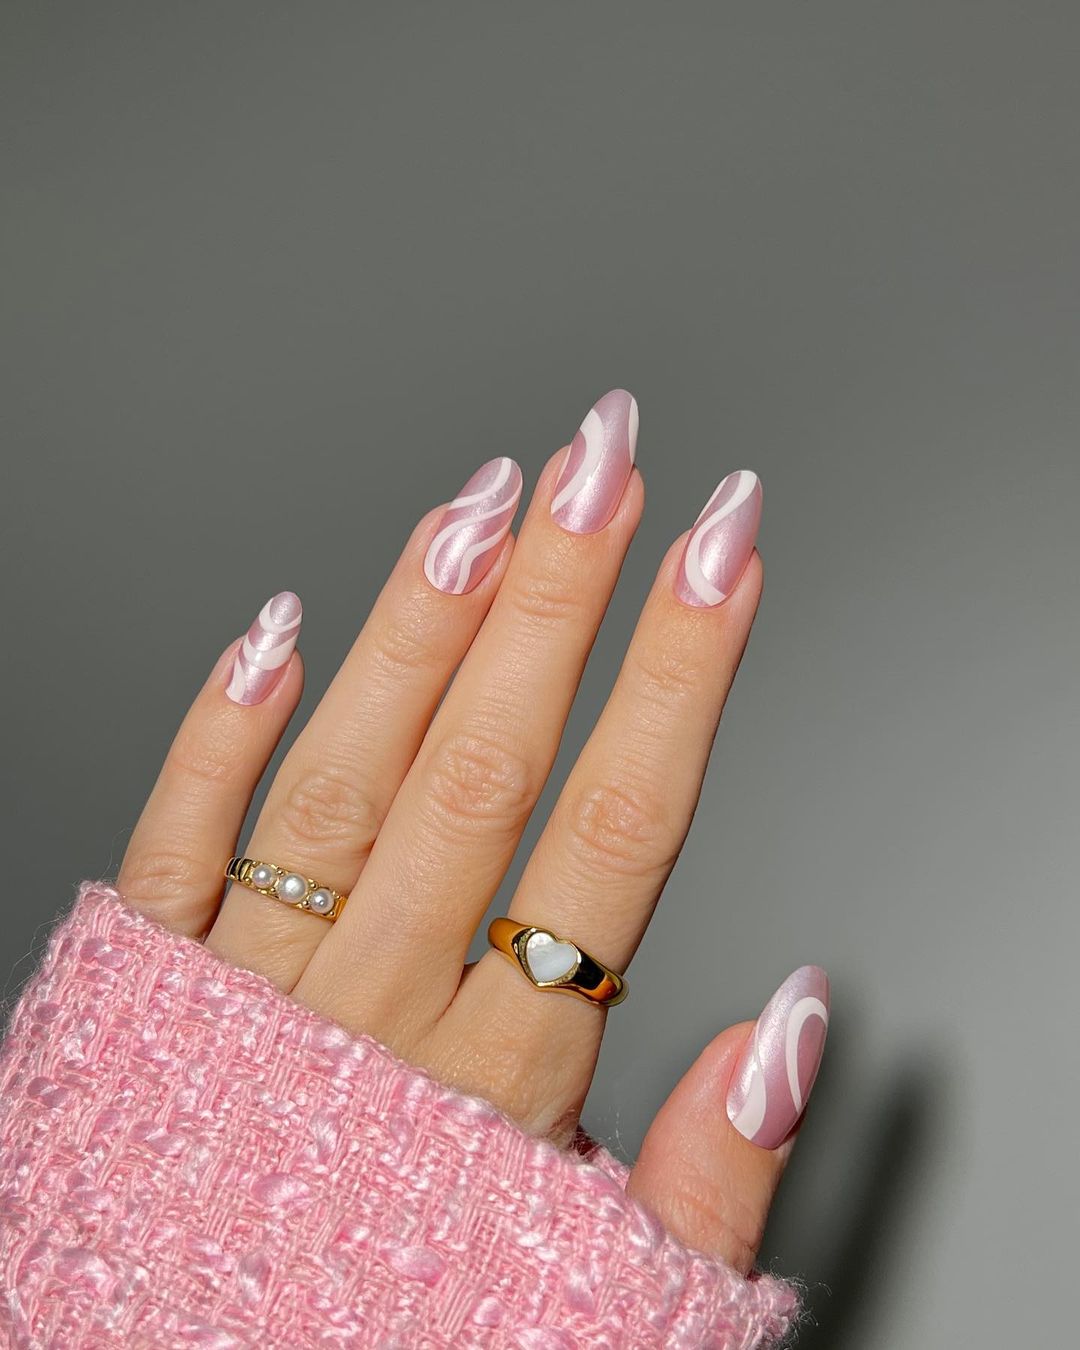 30 Fabulous Barbie Nails To Keep Up With The Barbiecore Trend - 245